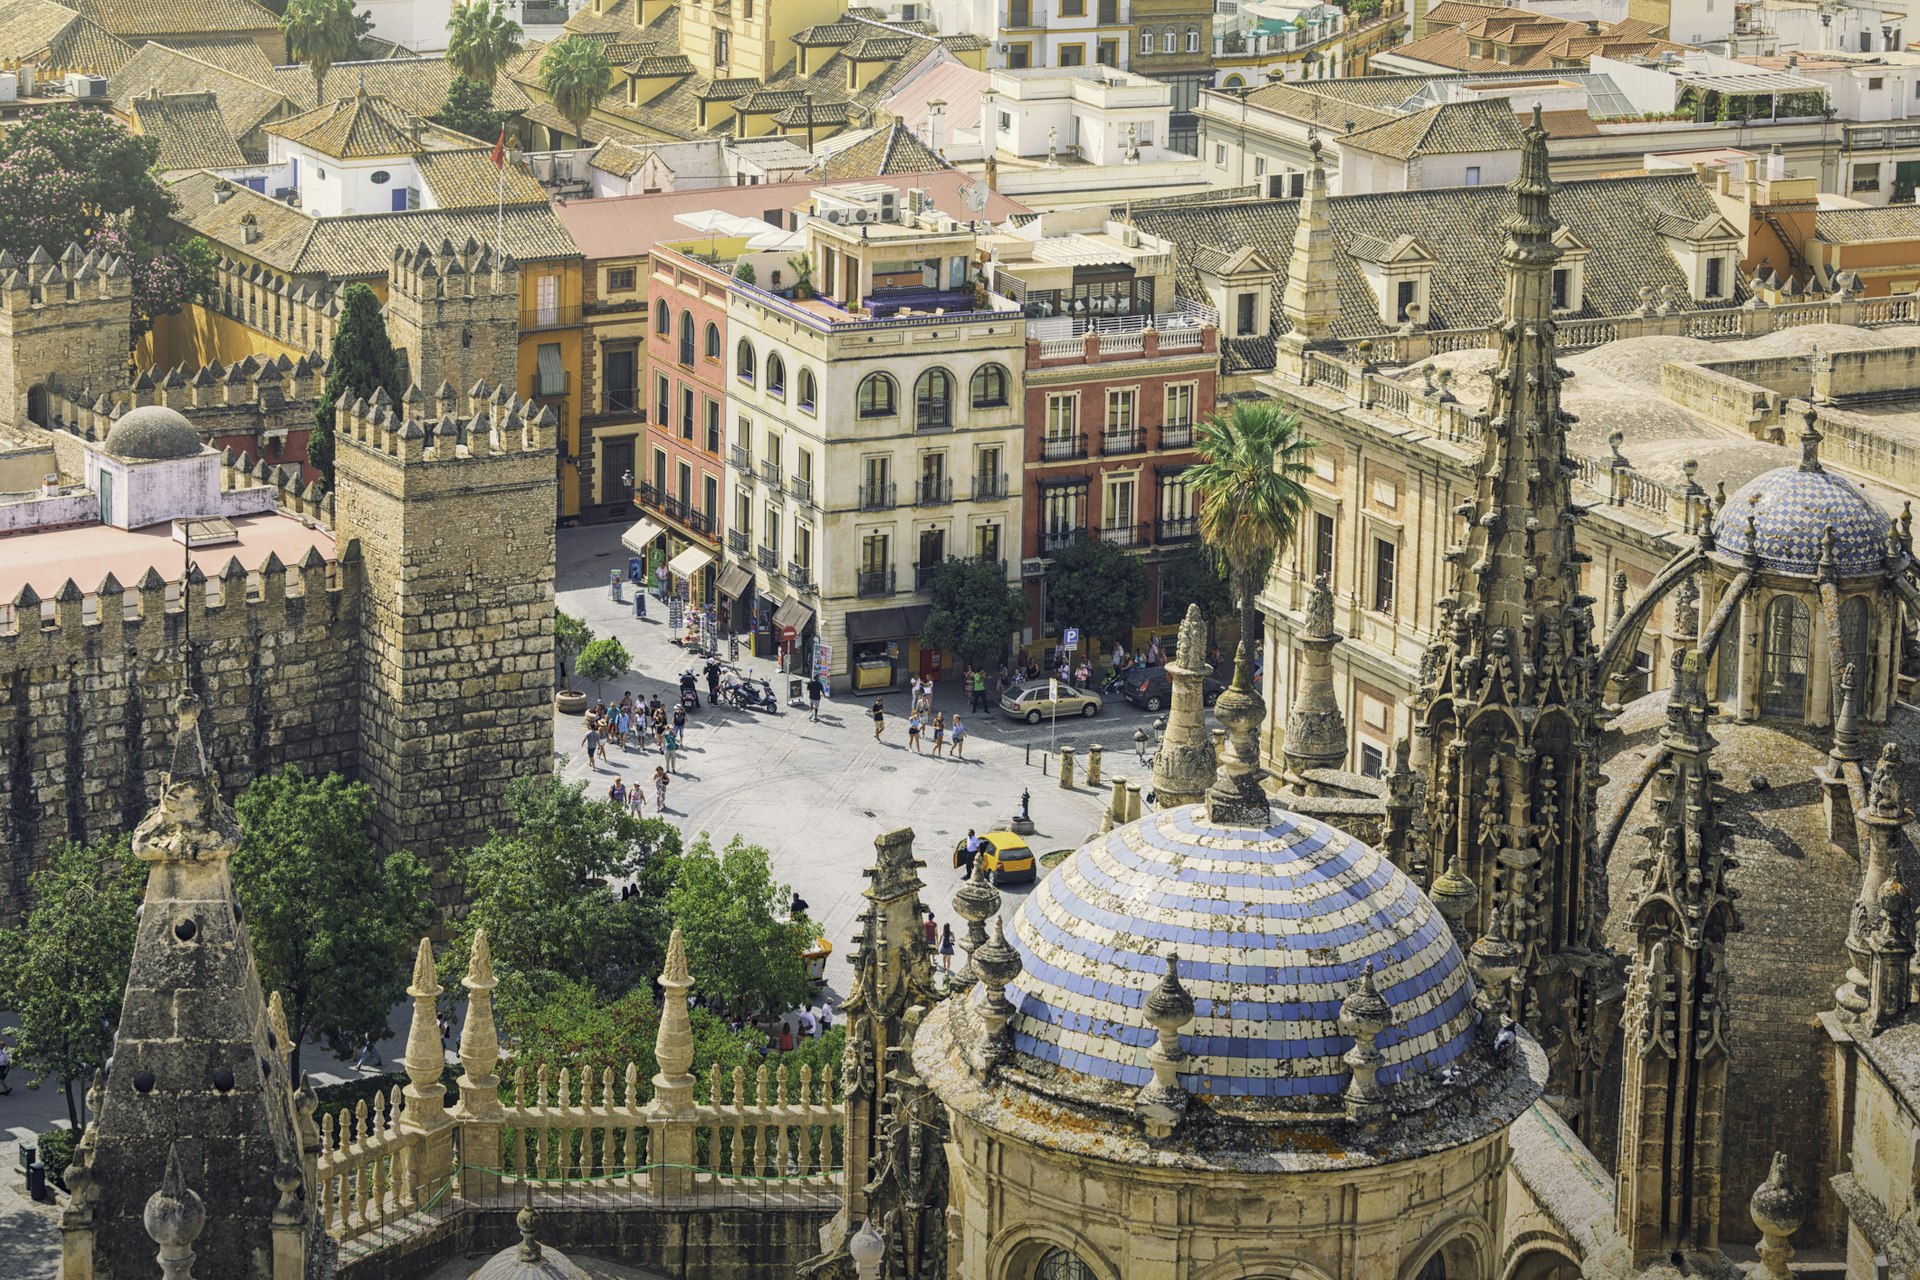 The spires and domes of Seville cathedral looking down on the old town streets below